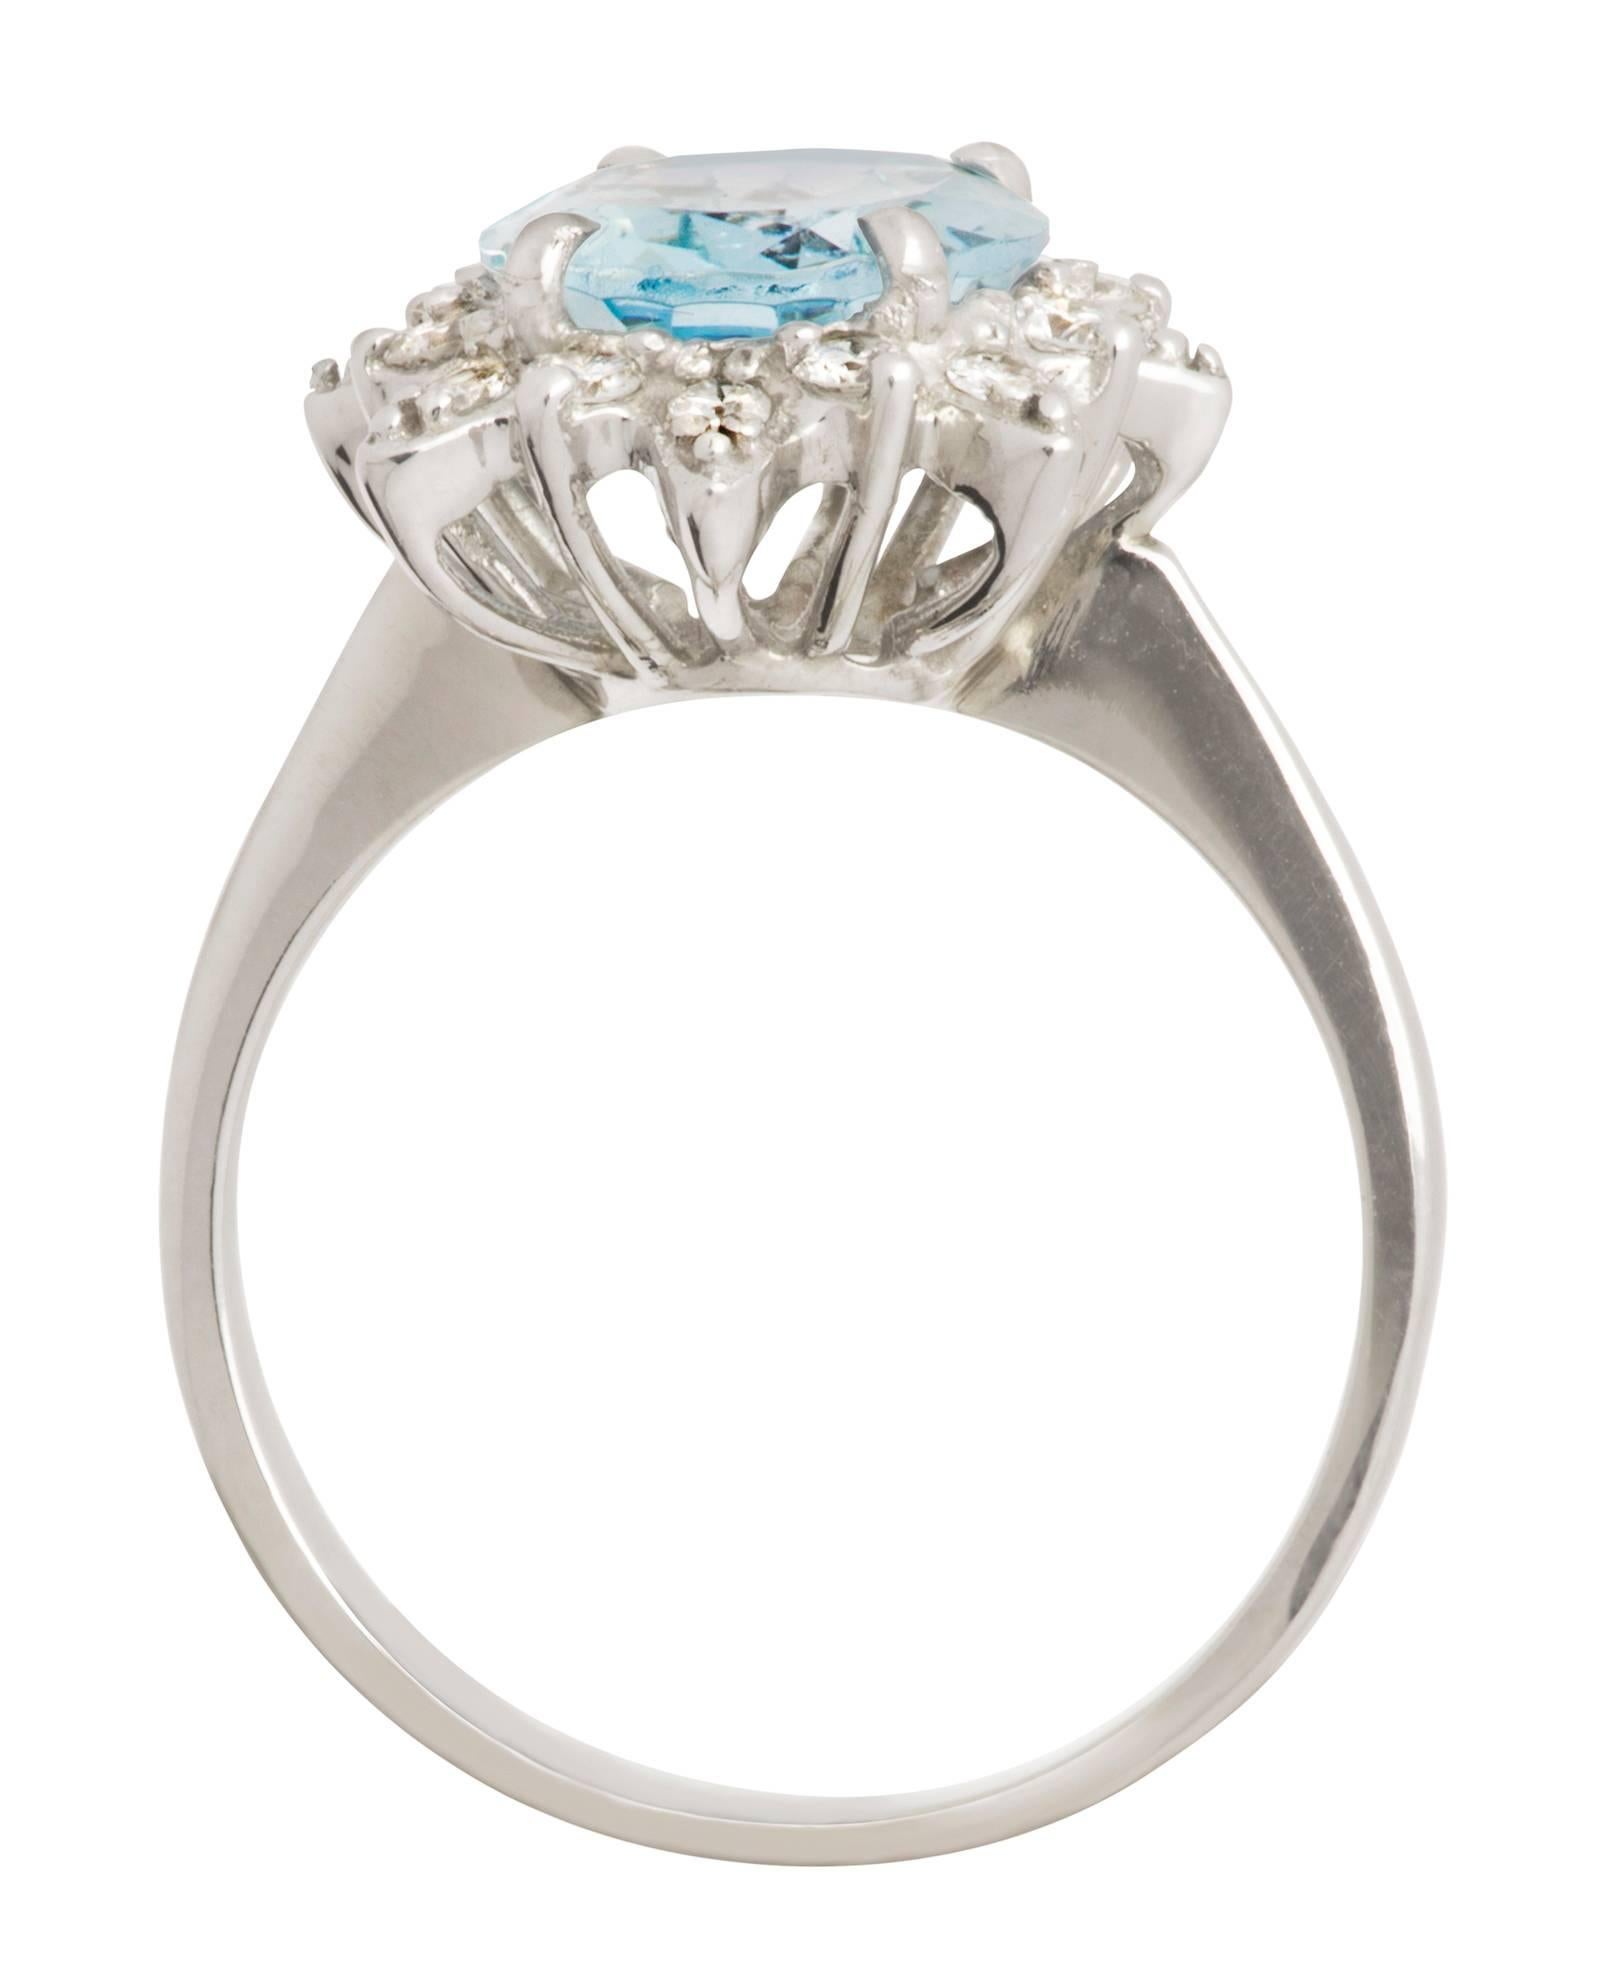 Beautiful aquamarine ring in 14k white gold.  Large oval cut approximately  5 ct aquamarine, surrounded by sixteen  .03 diamonds.  Total of .50 ct diamonds, Total weight 4.3g.  Overal stone size with diamonds. 16mm X 13mm
Ring size 7.25